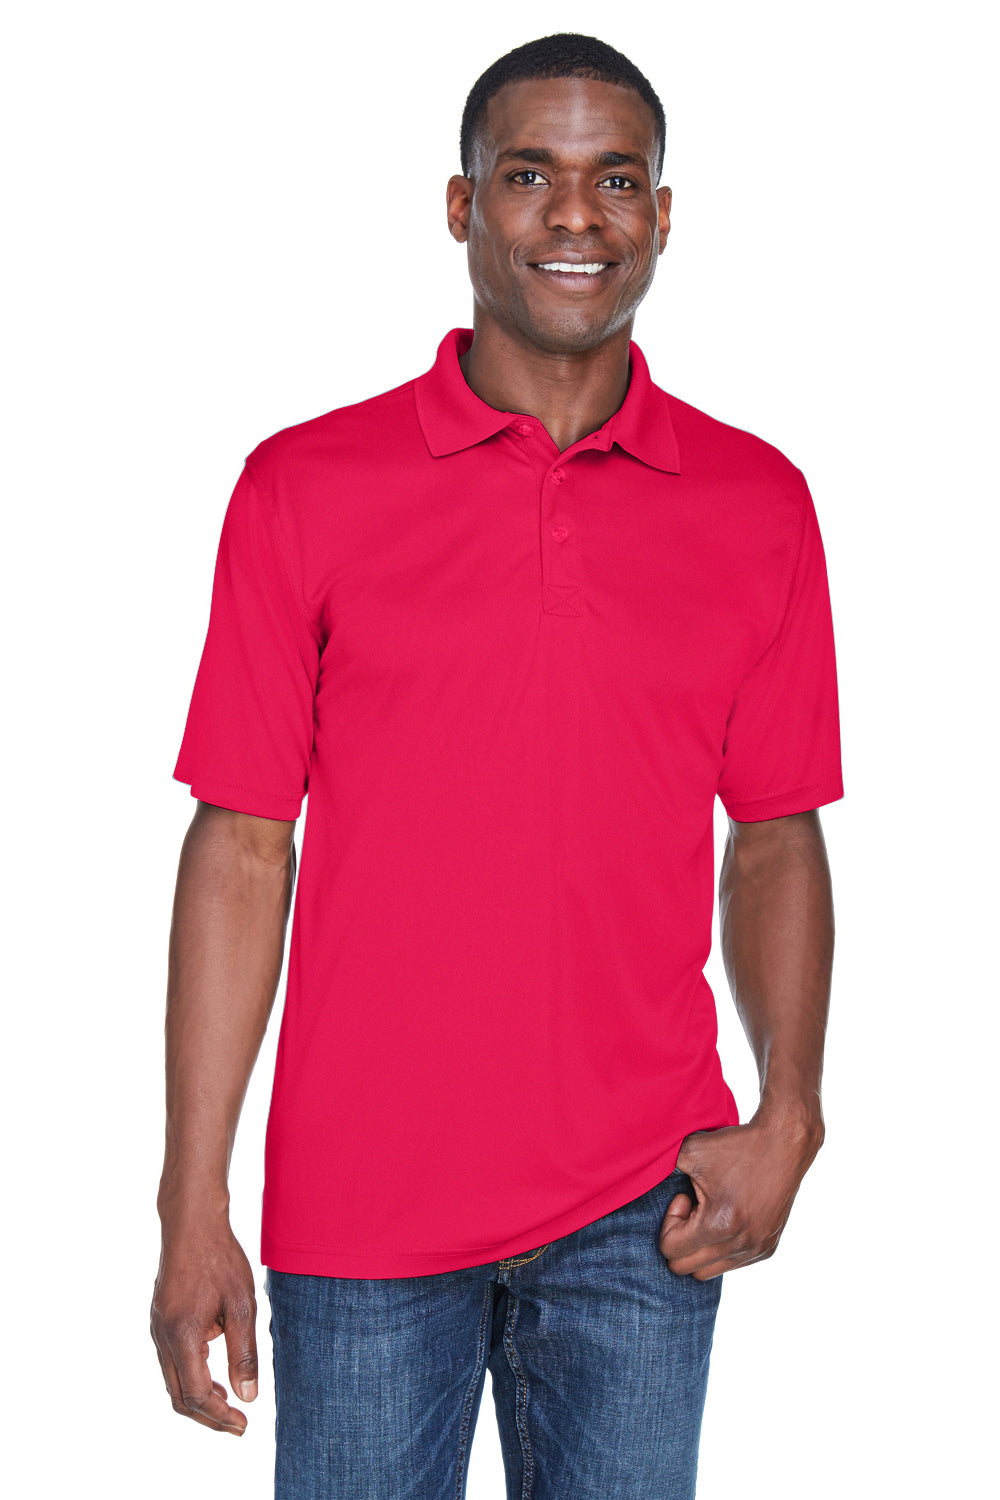 UltraClub 8425 Mens Cool & Dry Performance Moisture Wicking Short Sleeve Polo Shirt Red Front